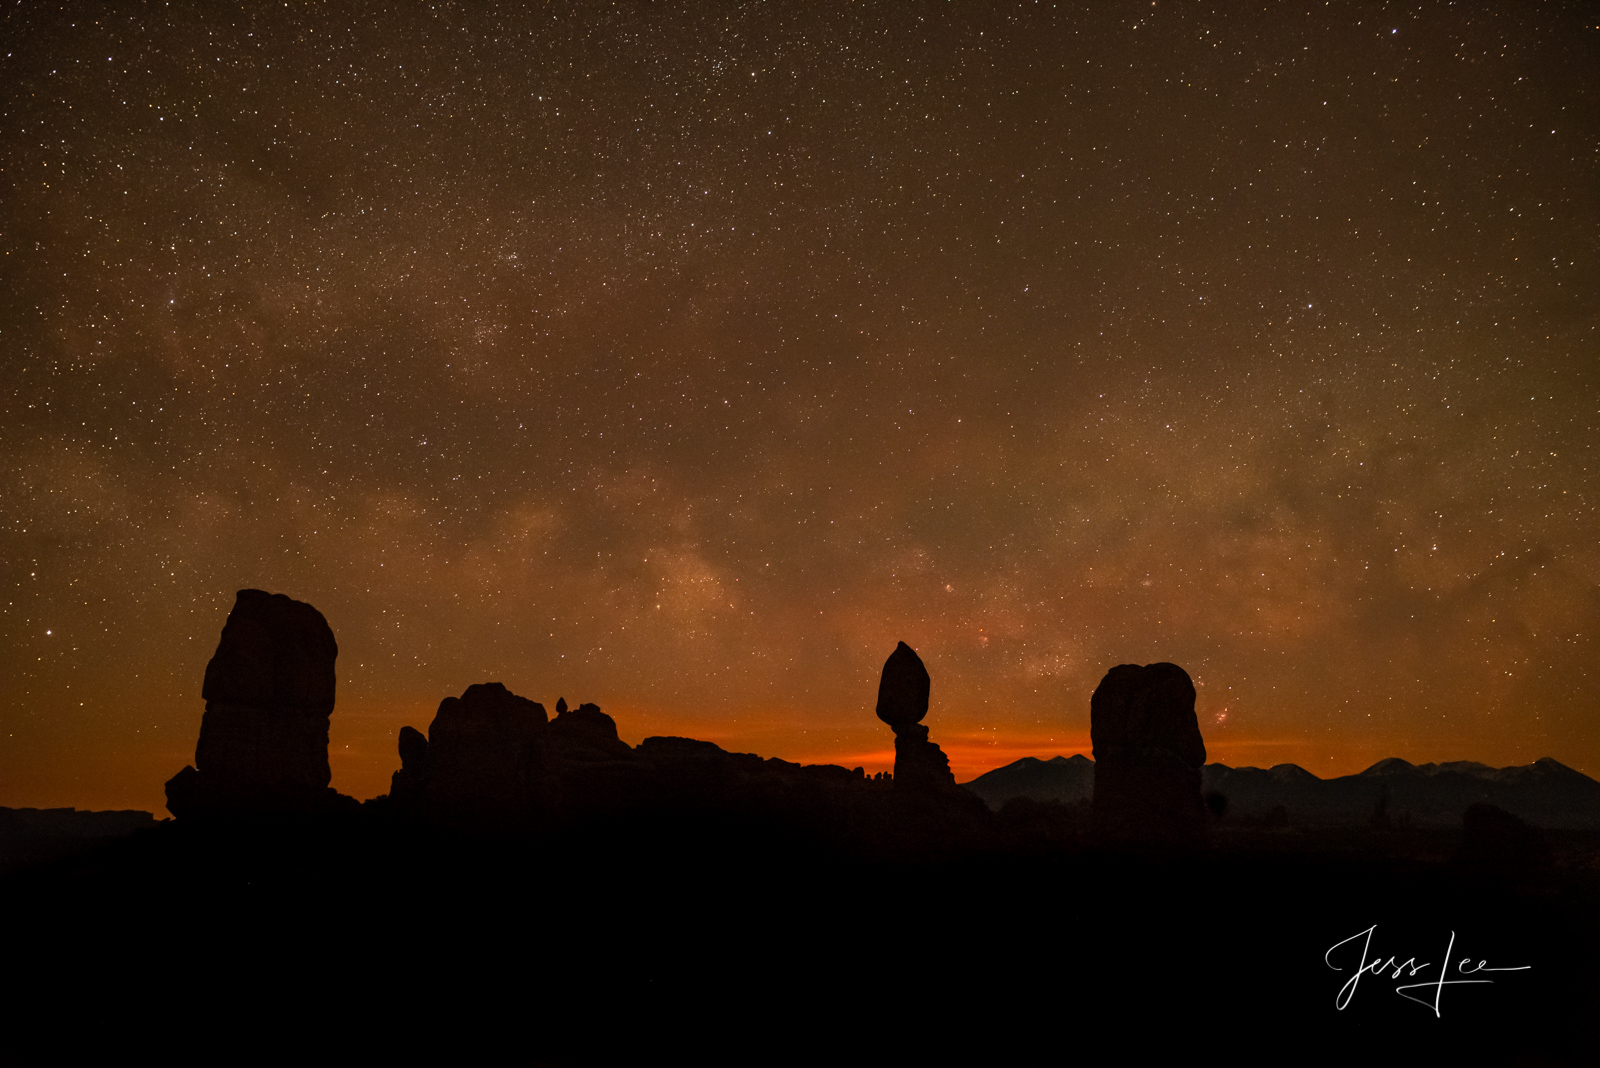 Limited Edition of 50 Exclusive high-resolution Museum Quality Fine Art Prints of the Night Sky. at Balanced Rock. Photos copyright...